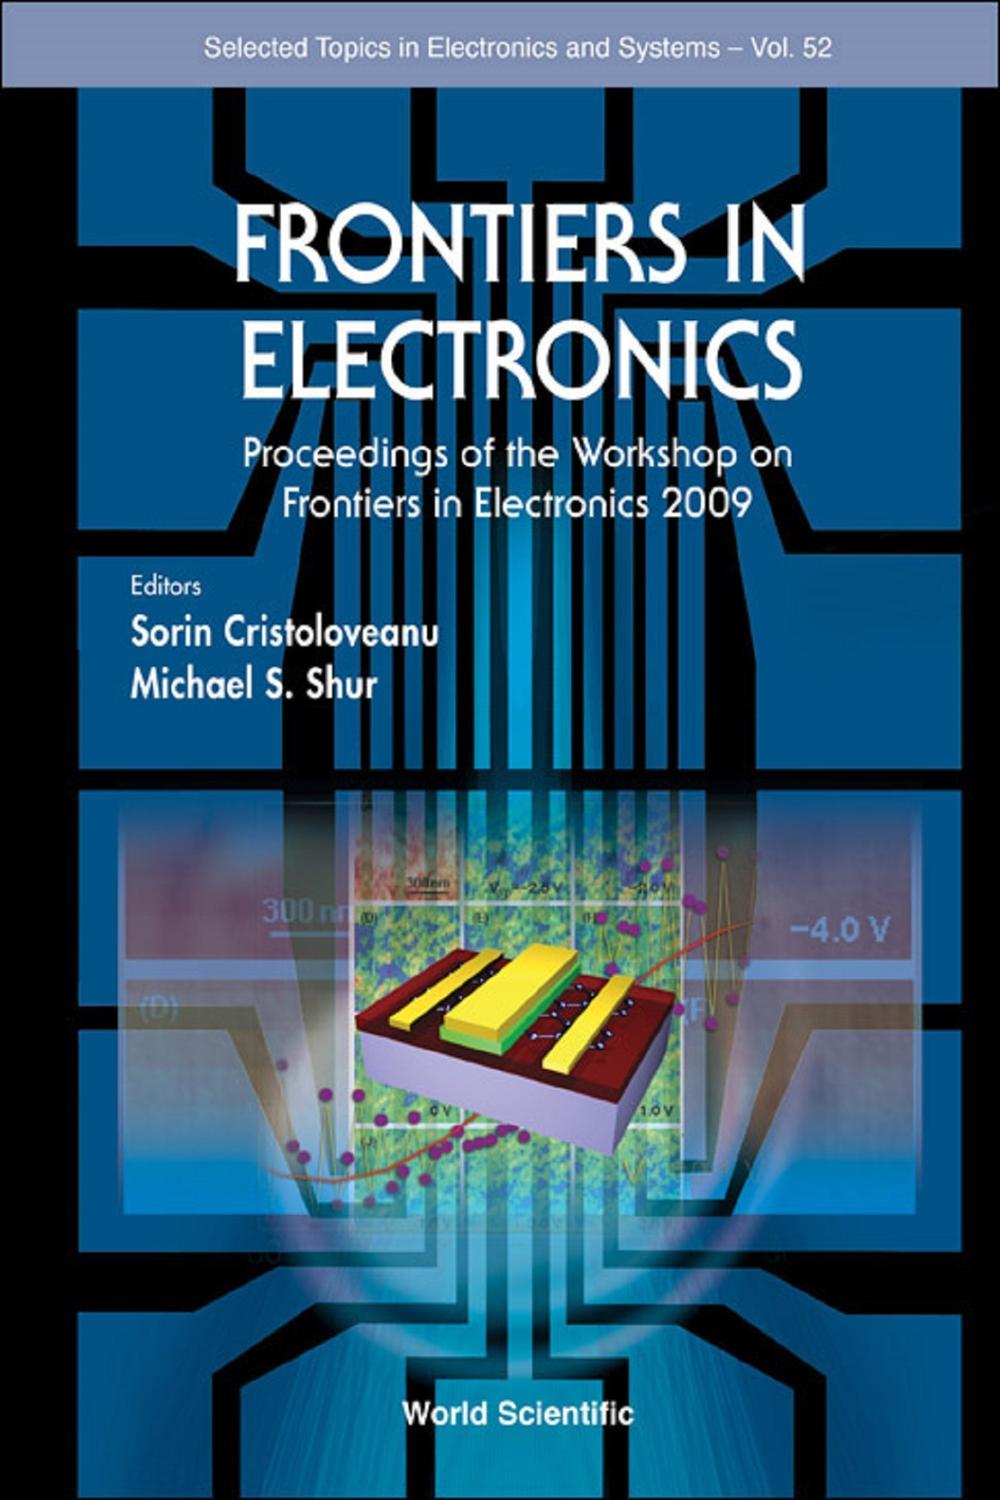 Frontiers In Electronics - Proceedings Of The Workshop On Frontiers In Electronics 2009 - Sorin Cristoloveanu, Michael S Shur